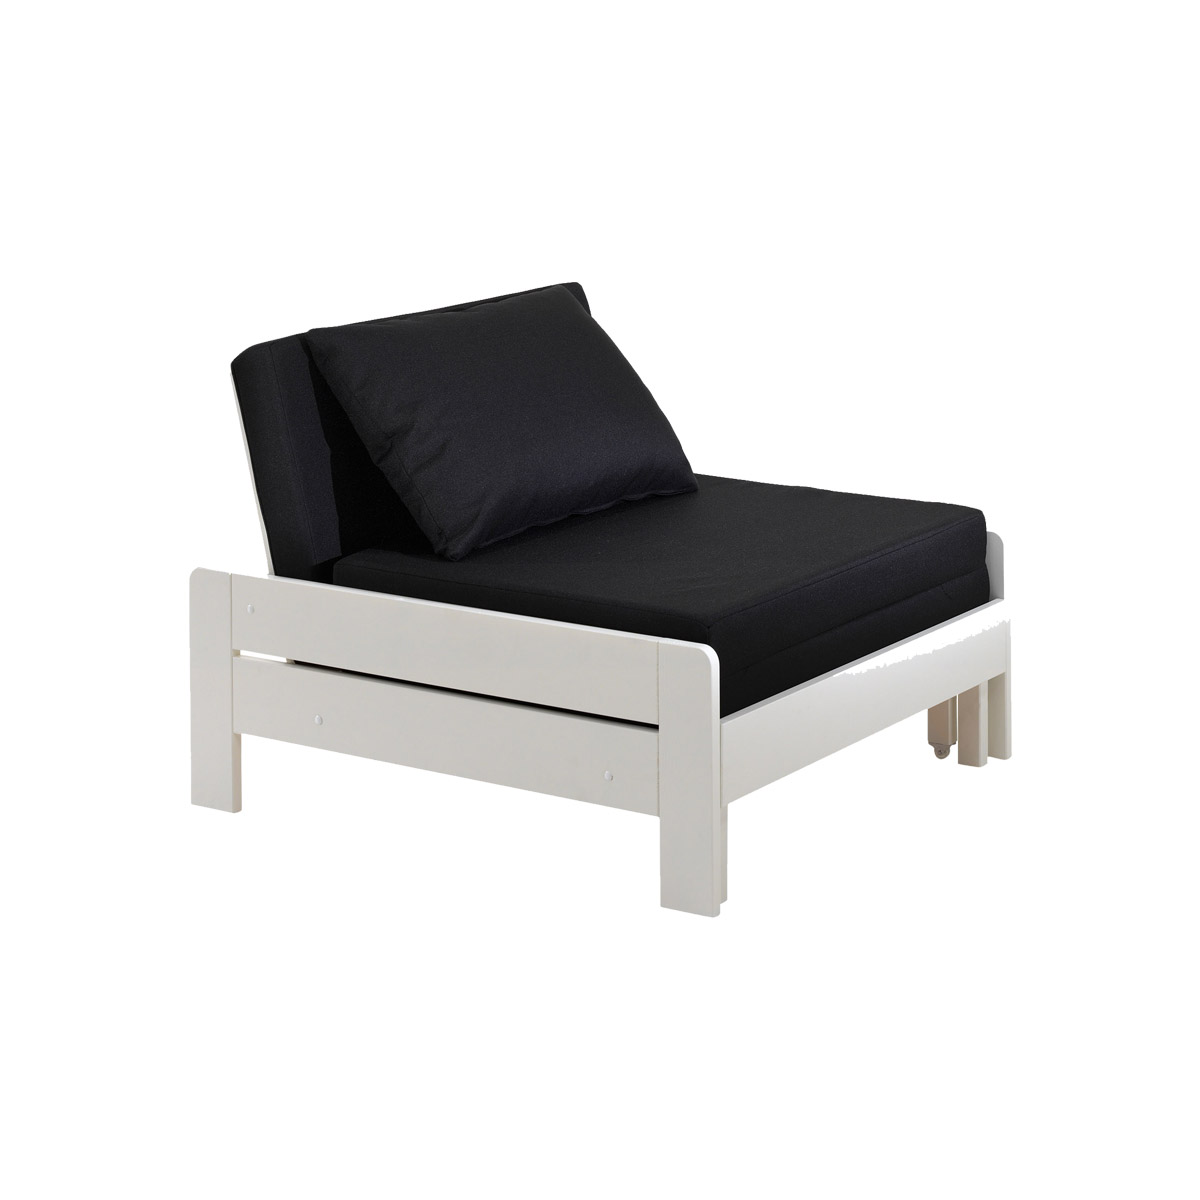 Vipack_Pino_lit_fauteuil_blanc